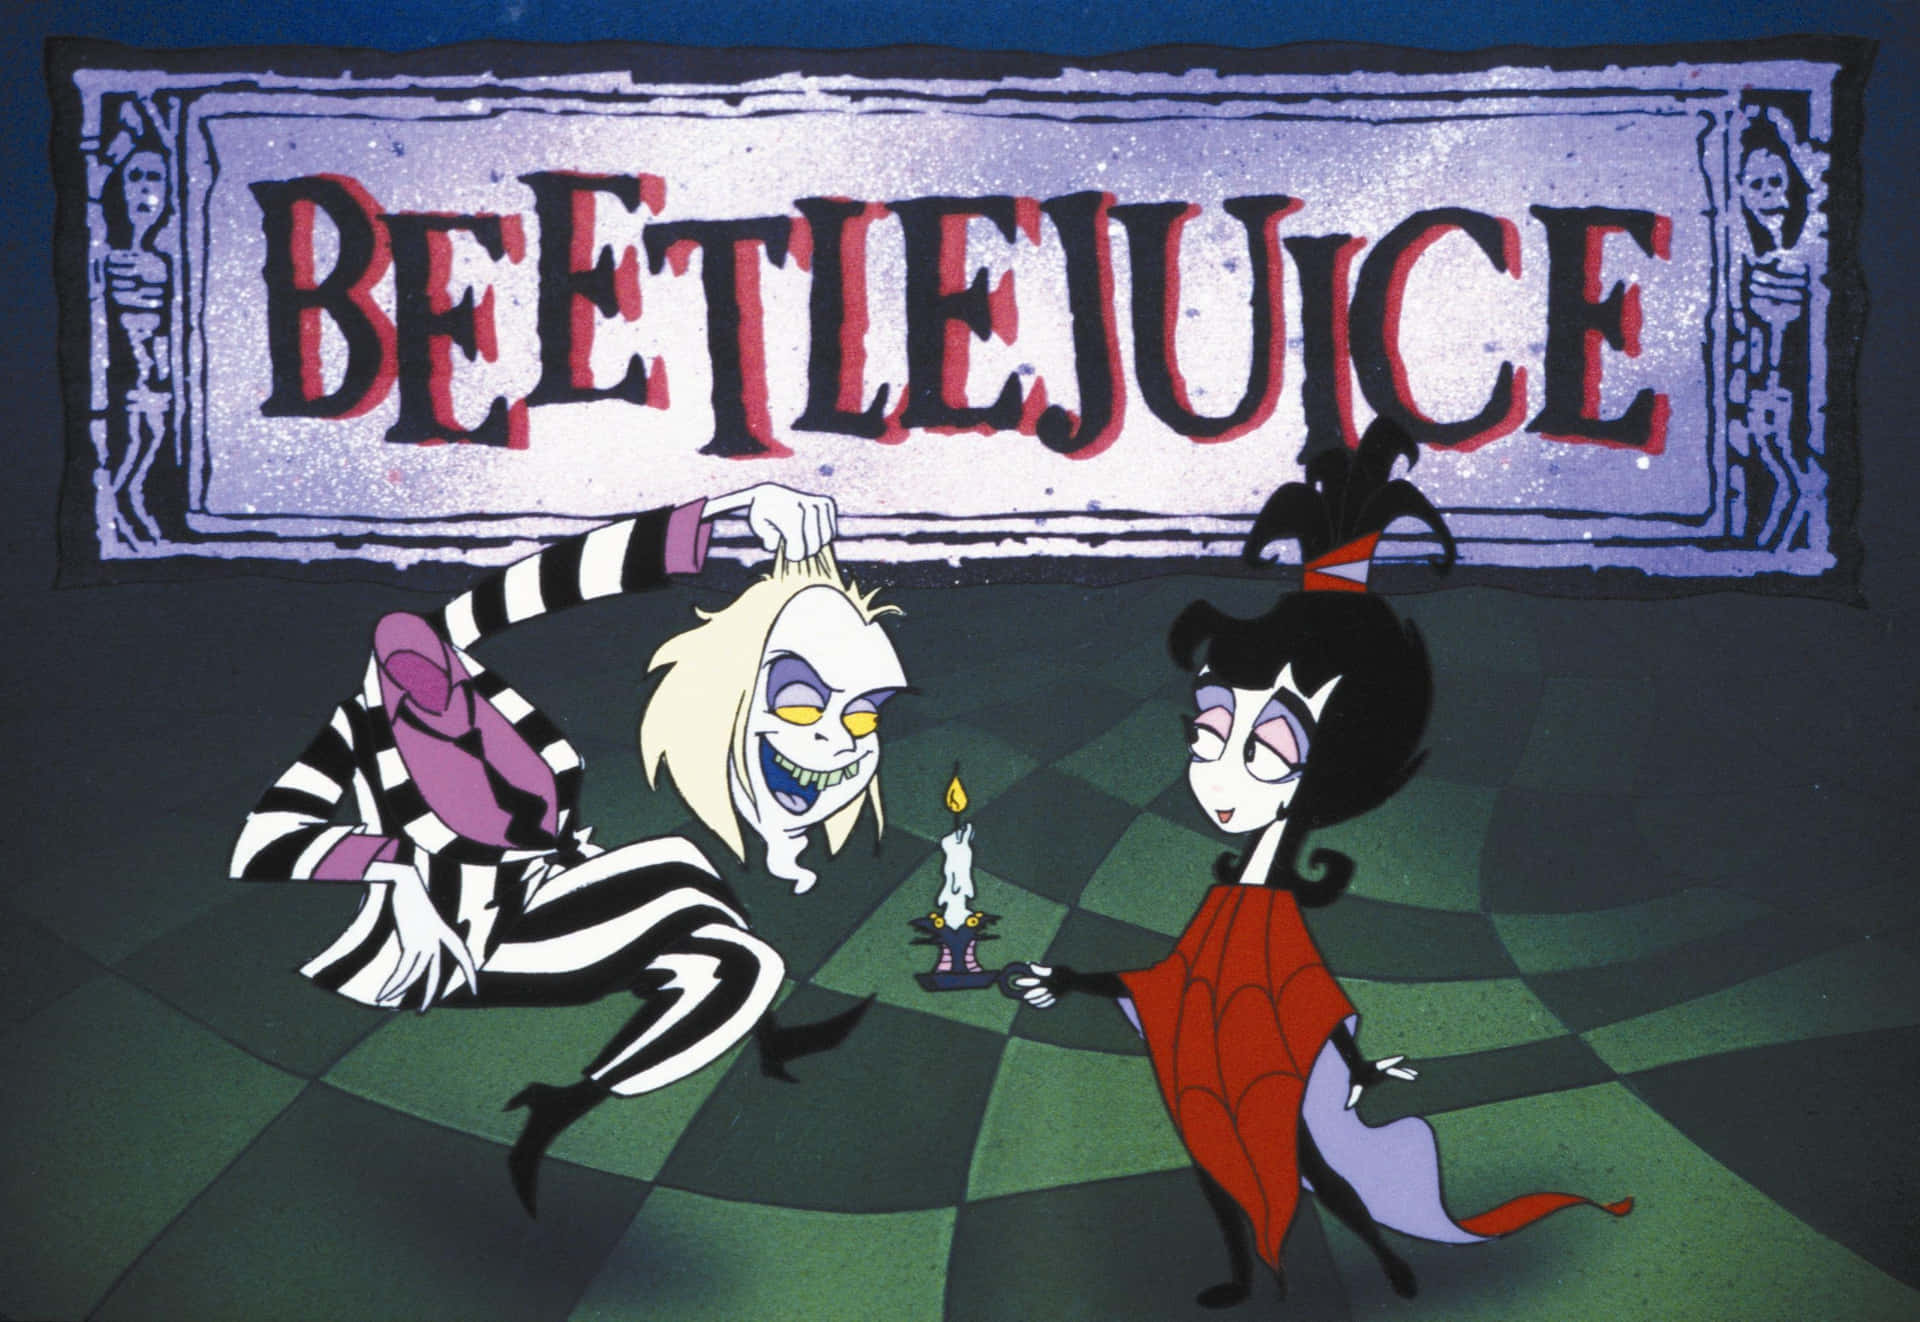 "Welcome to the world of Beetlejuice!"